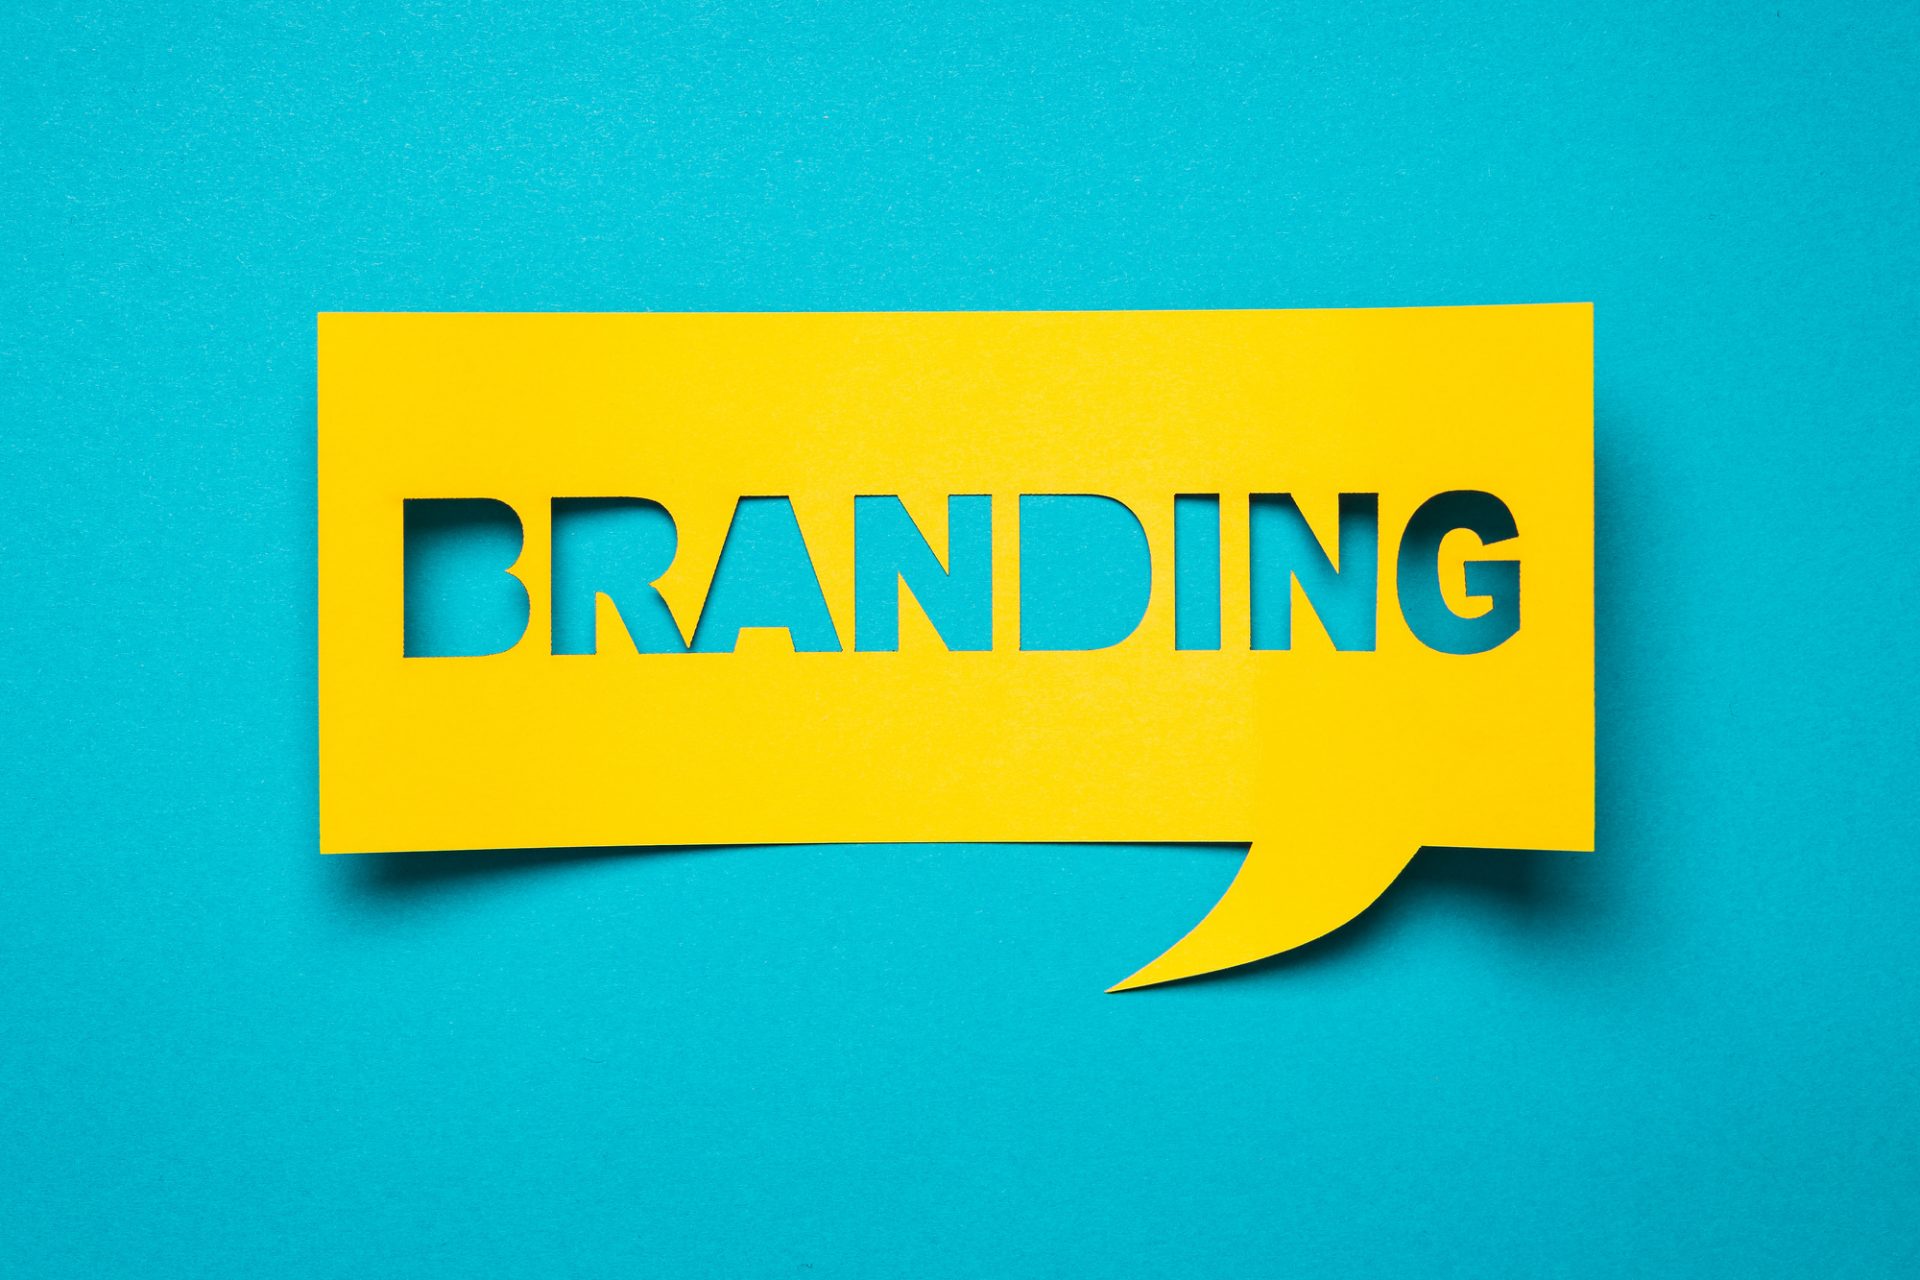 That’s My Brand! Building an Identity With Email Branding